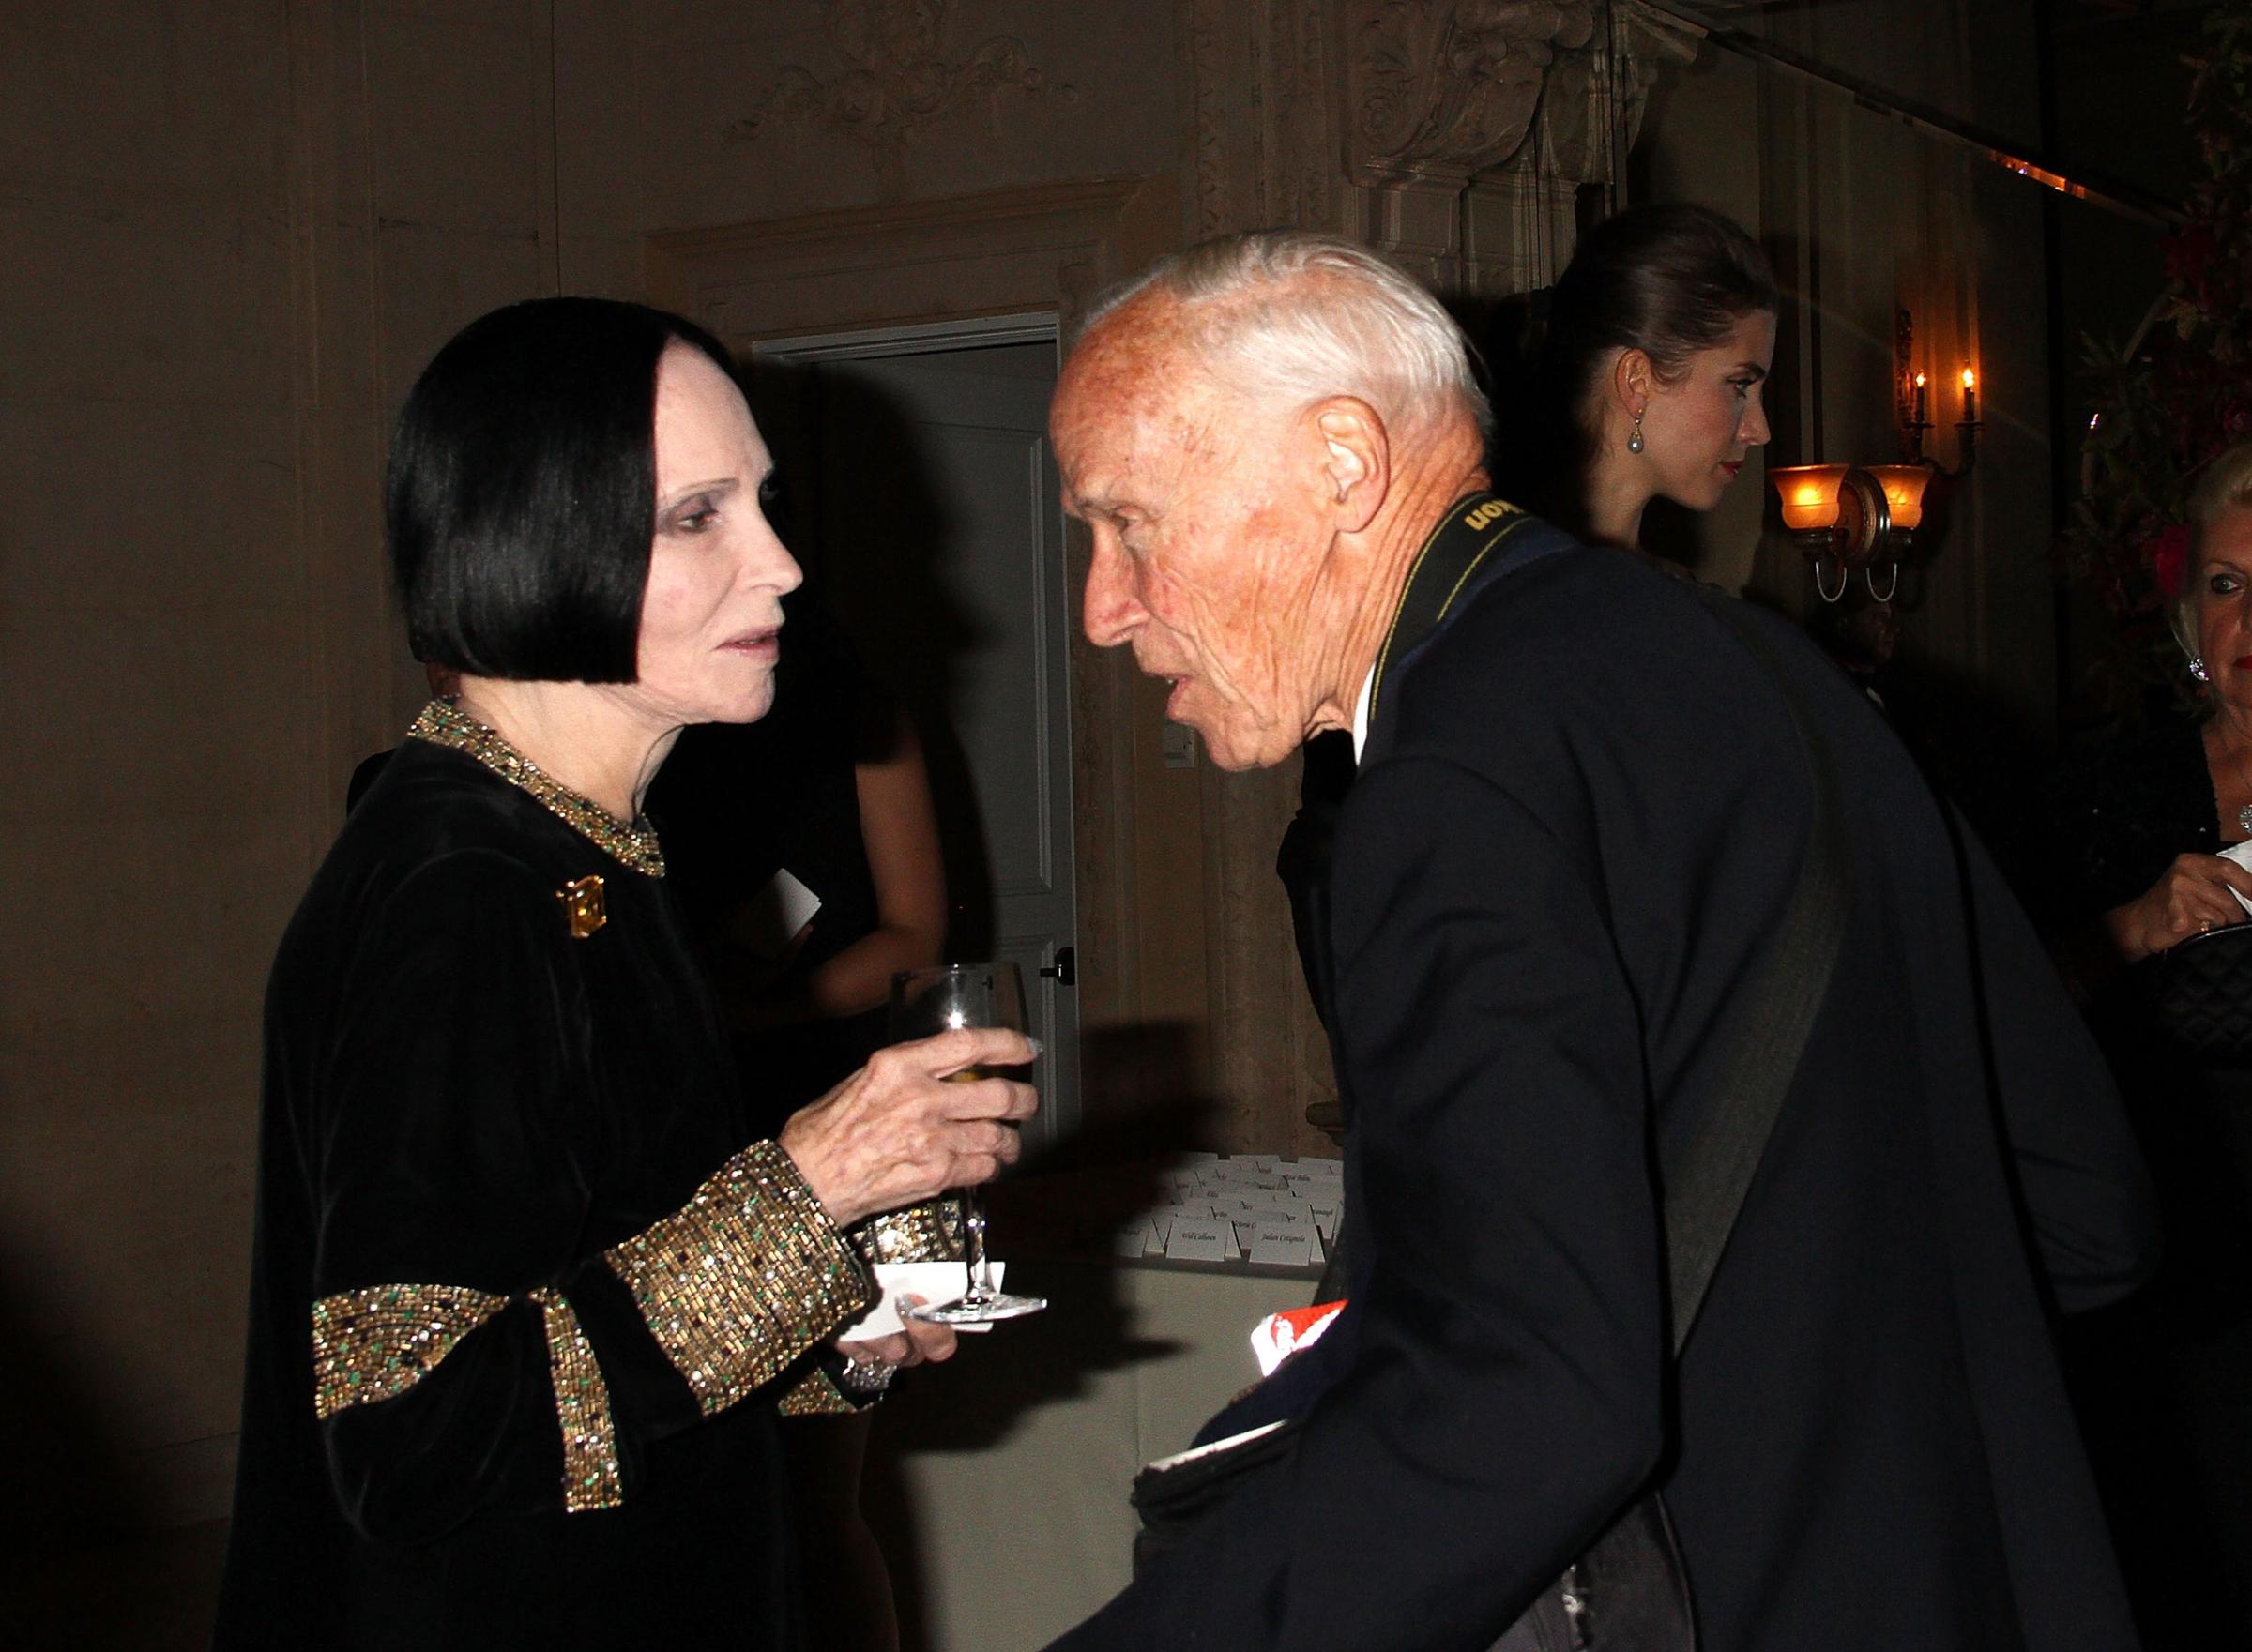 Designer Mary McFadden and New York Times photographer Bill Cunningham attend the Casita Maria Fiesta 2015 at The Plaza Hotel in New York City on October 13, 2015.